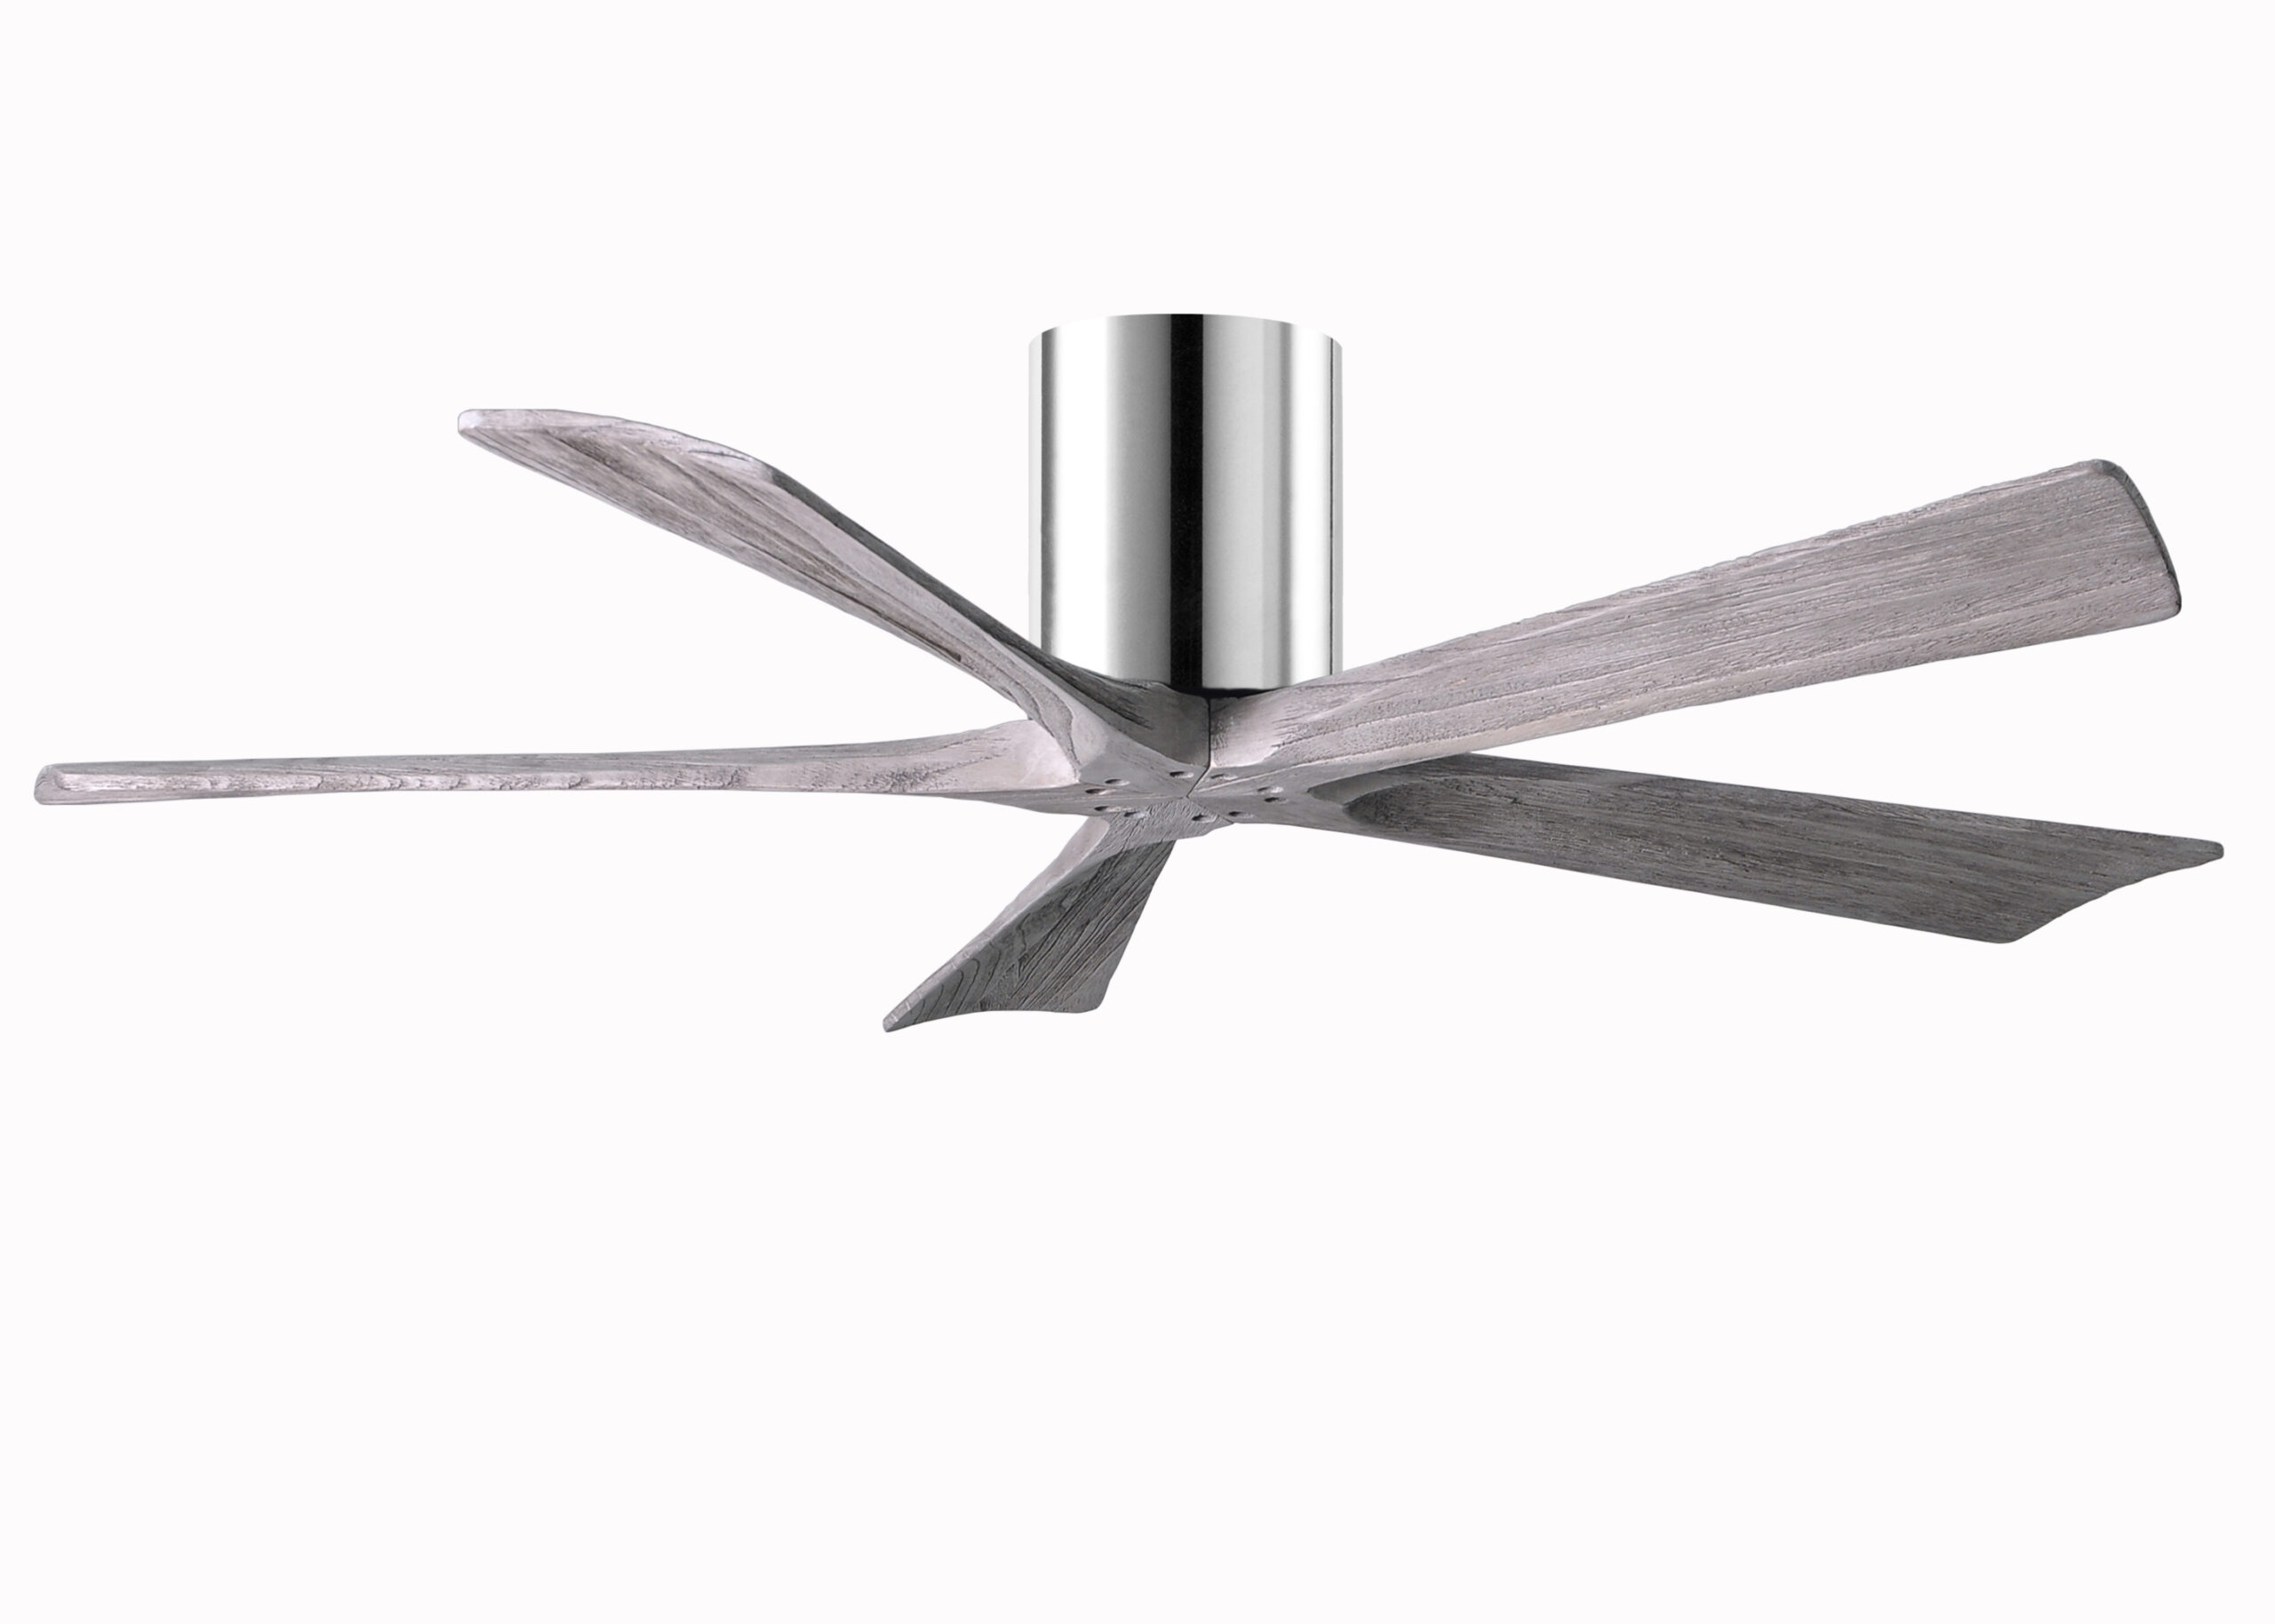 Irene-5H Ceiling Fan in Polished Chrome Finish with 52